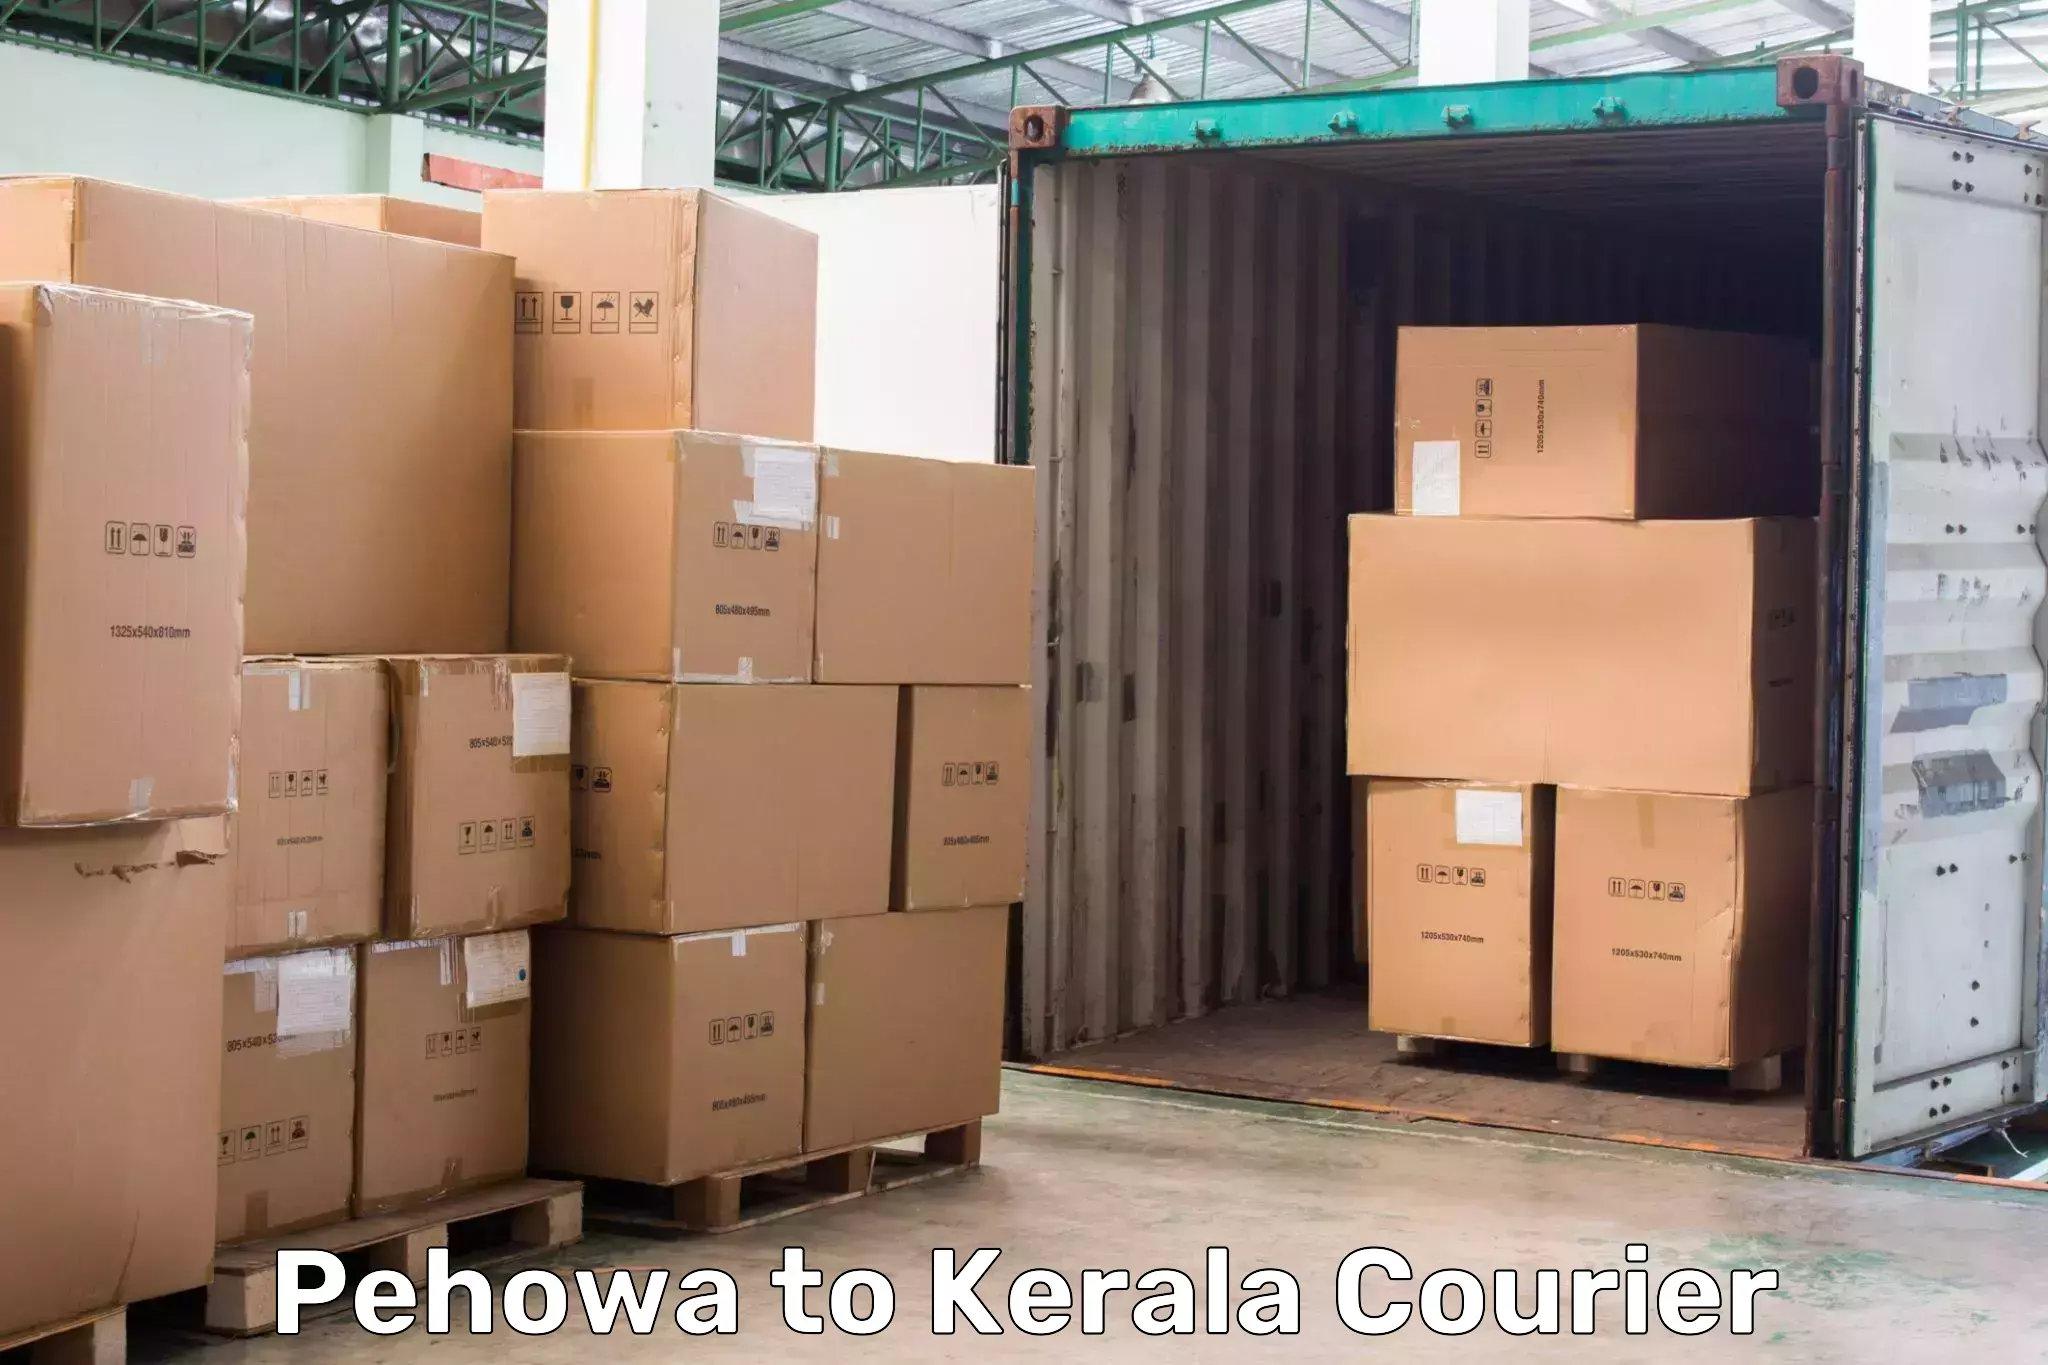 Express mail solutions Pehowa to Kochi